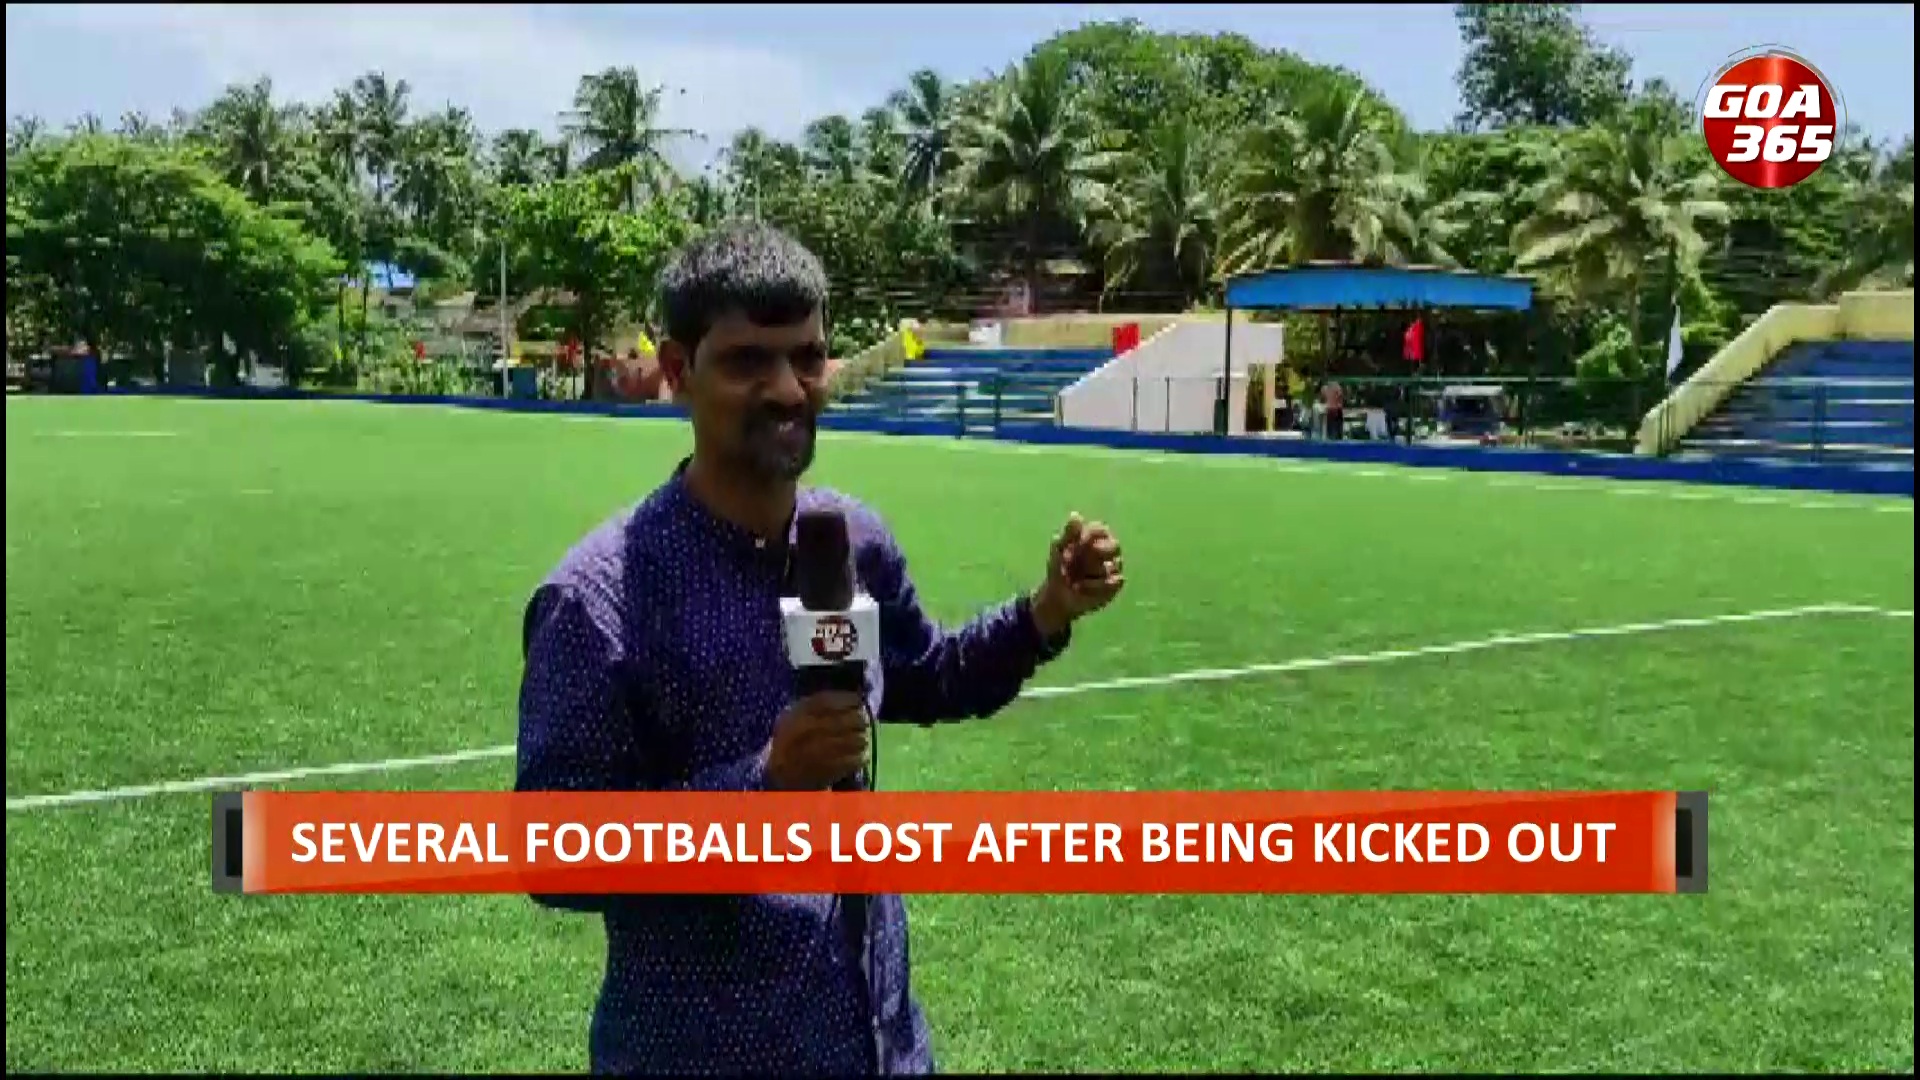 what is the logic of a top-quality football pitch with no facilities || ENGLISH || GOA365